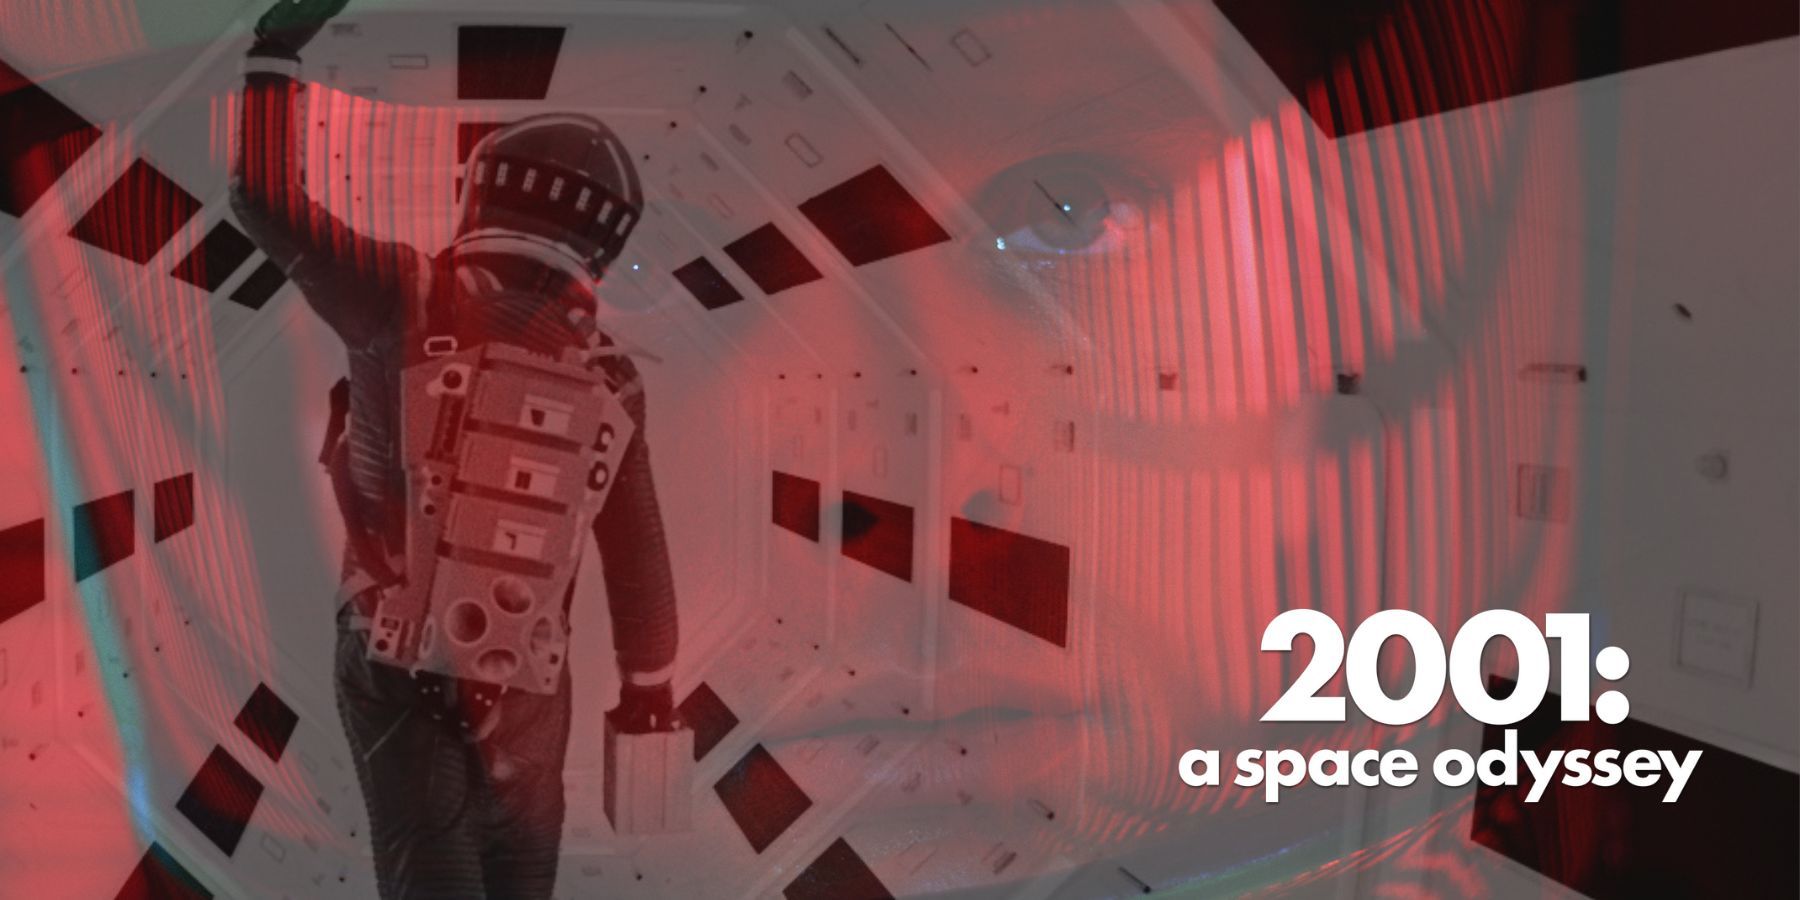 2001-a-space-odyssey-kubrick-feature-anniversary